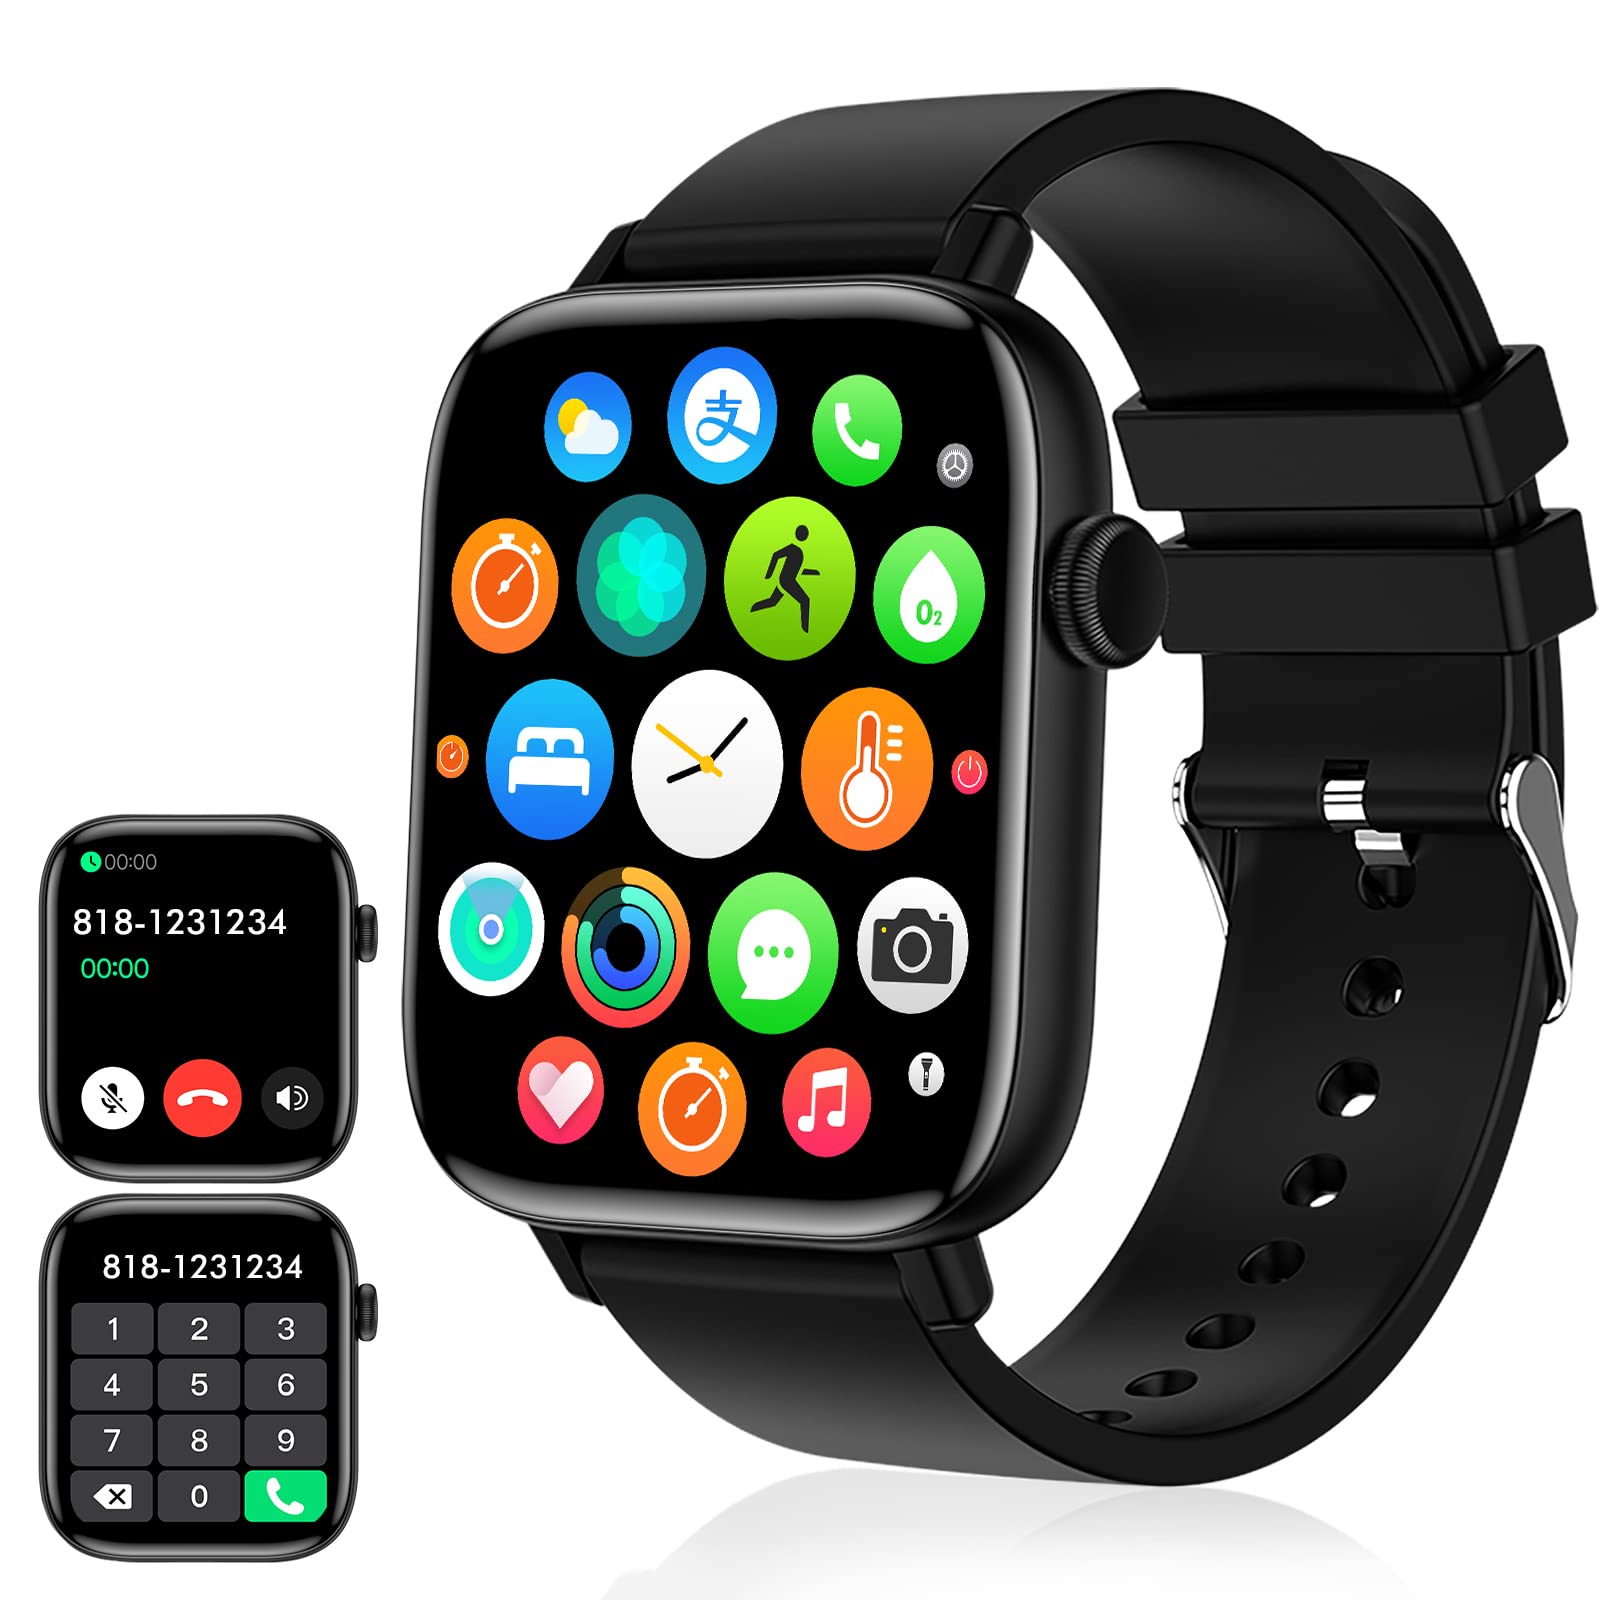 A smartphone and a smartwatch connected via Bluetooth.